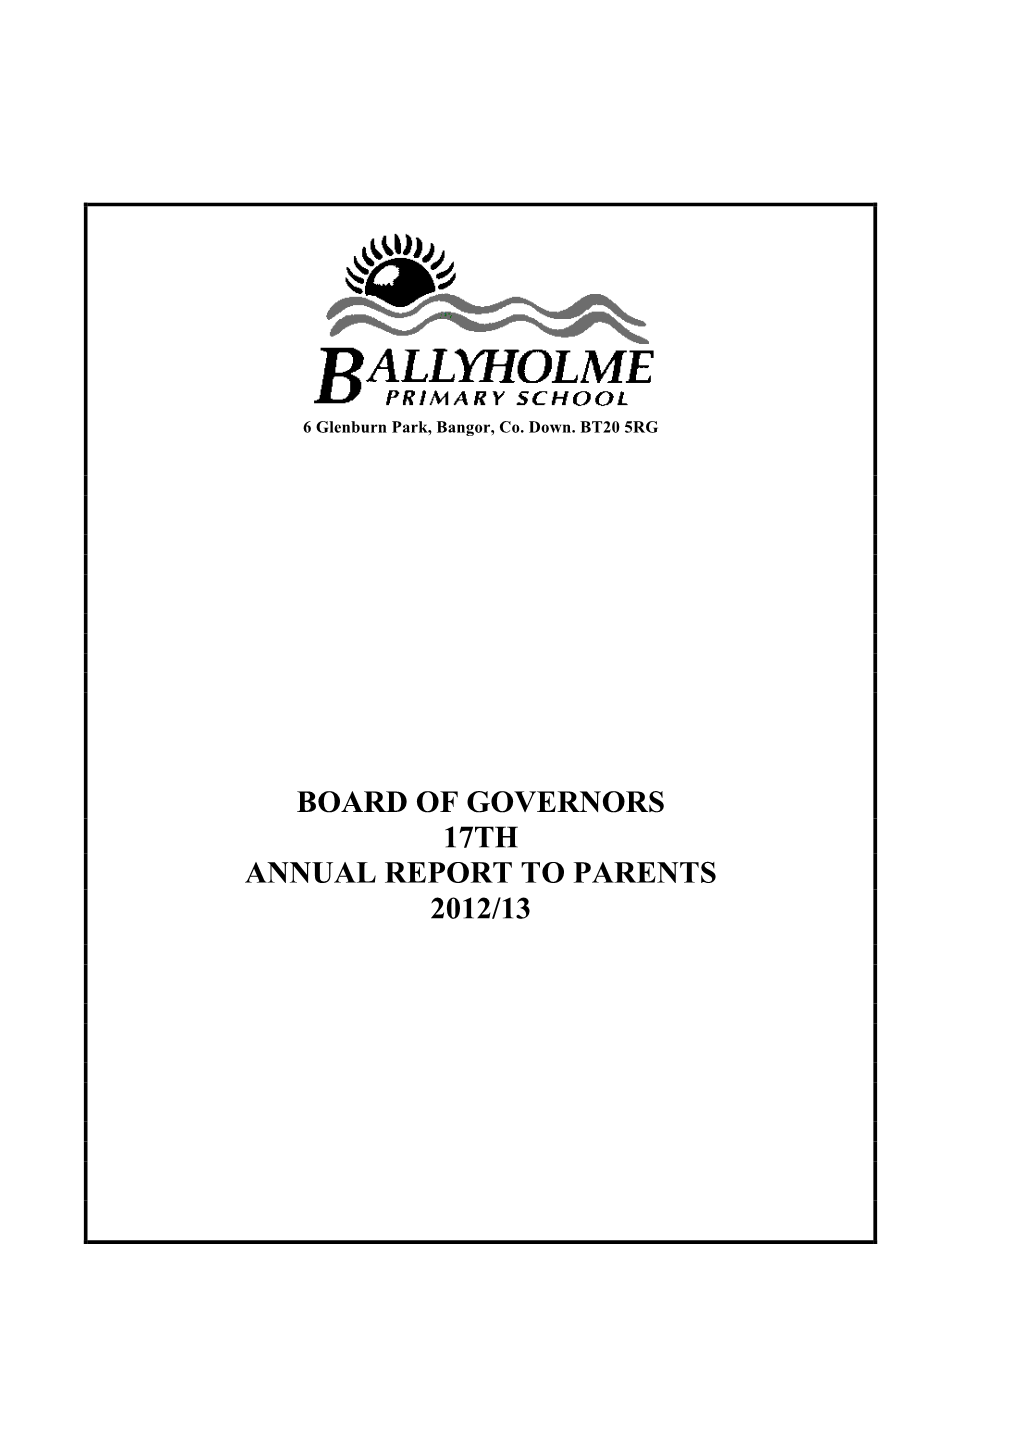 Board of Governors 17Th Annual Report to Parents 2012/13